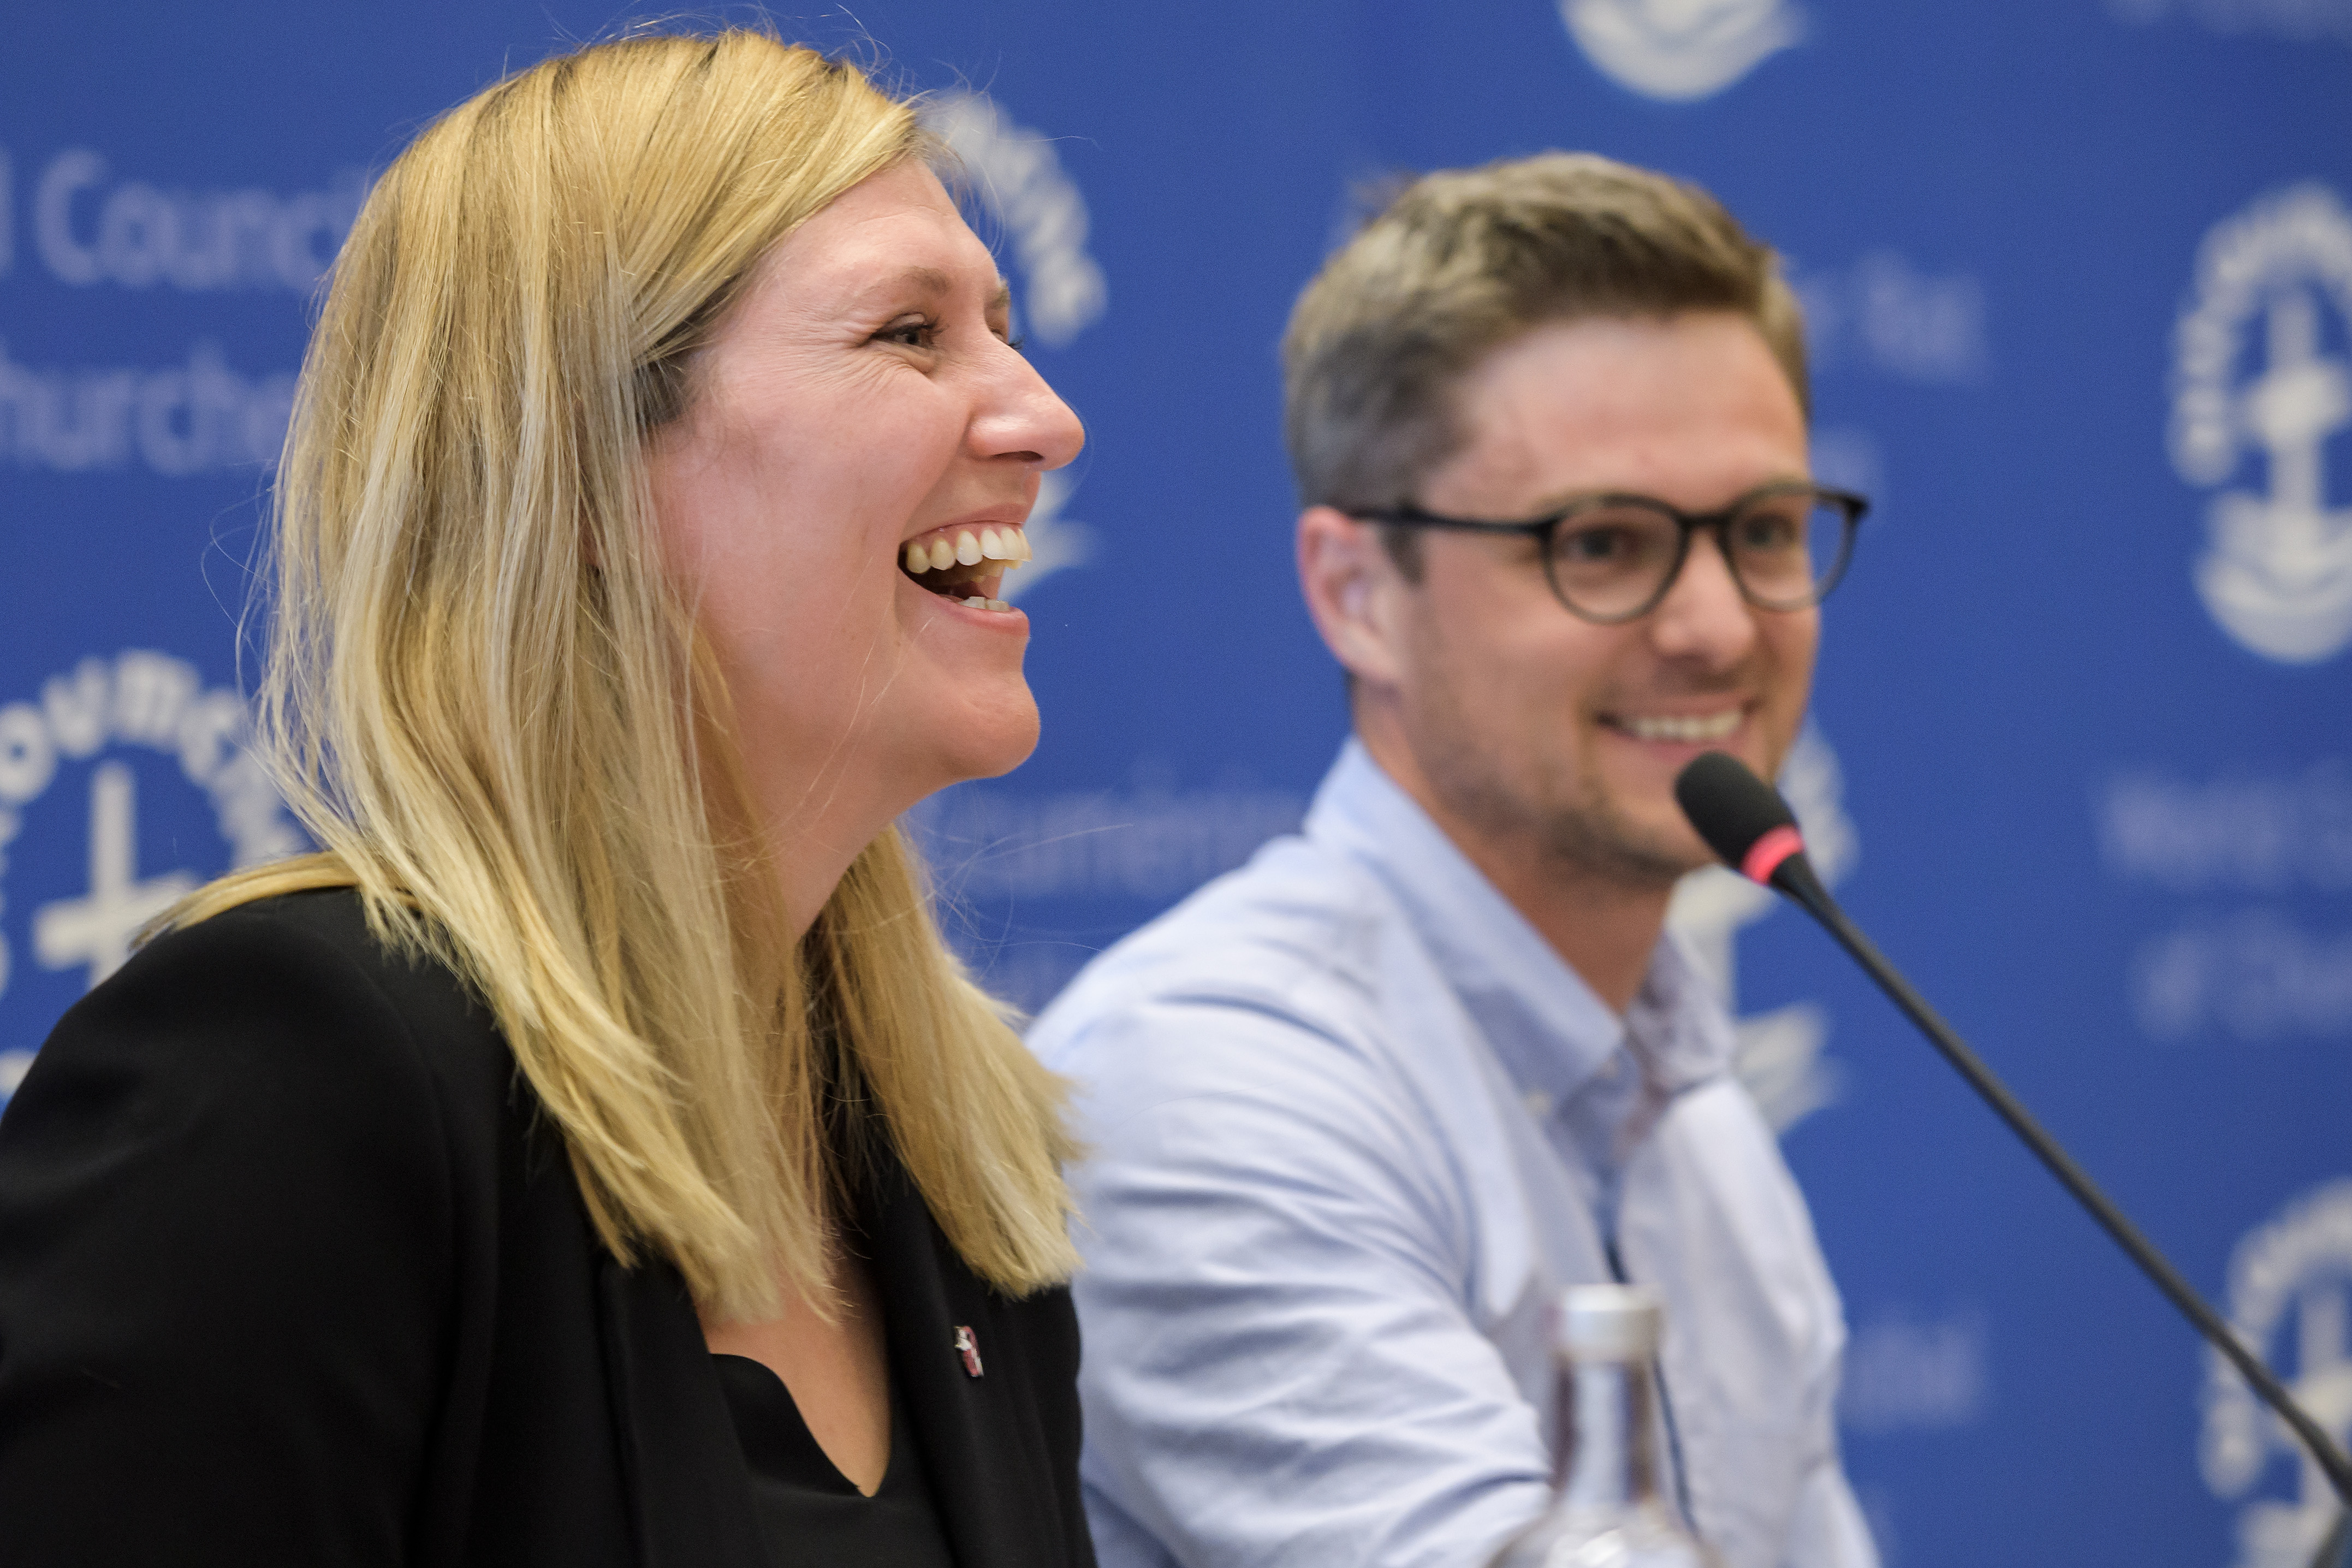 ICAN Executive director Beatrice Fihn (L) reacts next to coordinator Daniel Hogstan (R) during a press conference after ICAN won the Nobel Peace Prize on October 6, 2017 in Geneva. (Fabrice Coffrini—AFP/Getty Images)